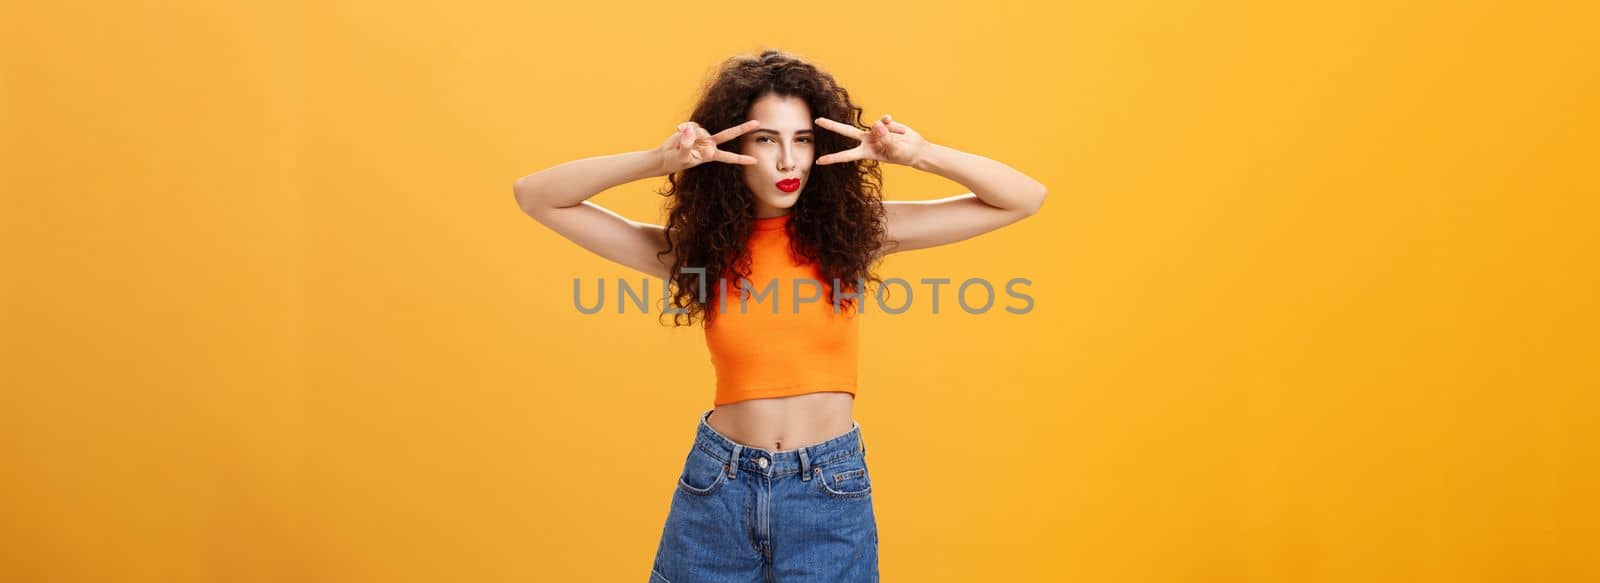 Portrait of good-looking daring and sexy stylish woman. with curly hairstyle in red lipstick and cropped top showing victory or peace gestures overs eyes squinting folding lips flirty over orange wall.